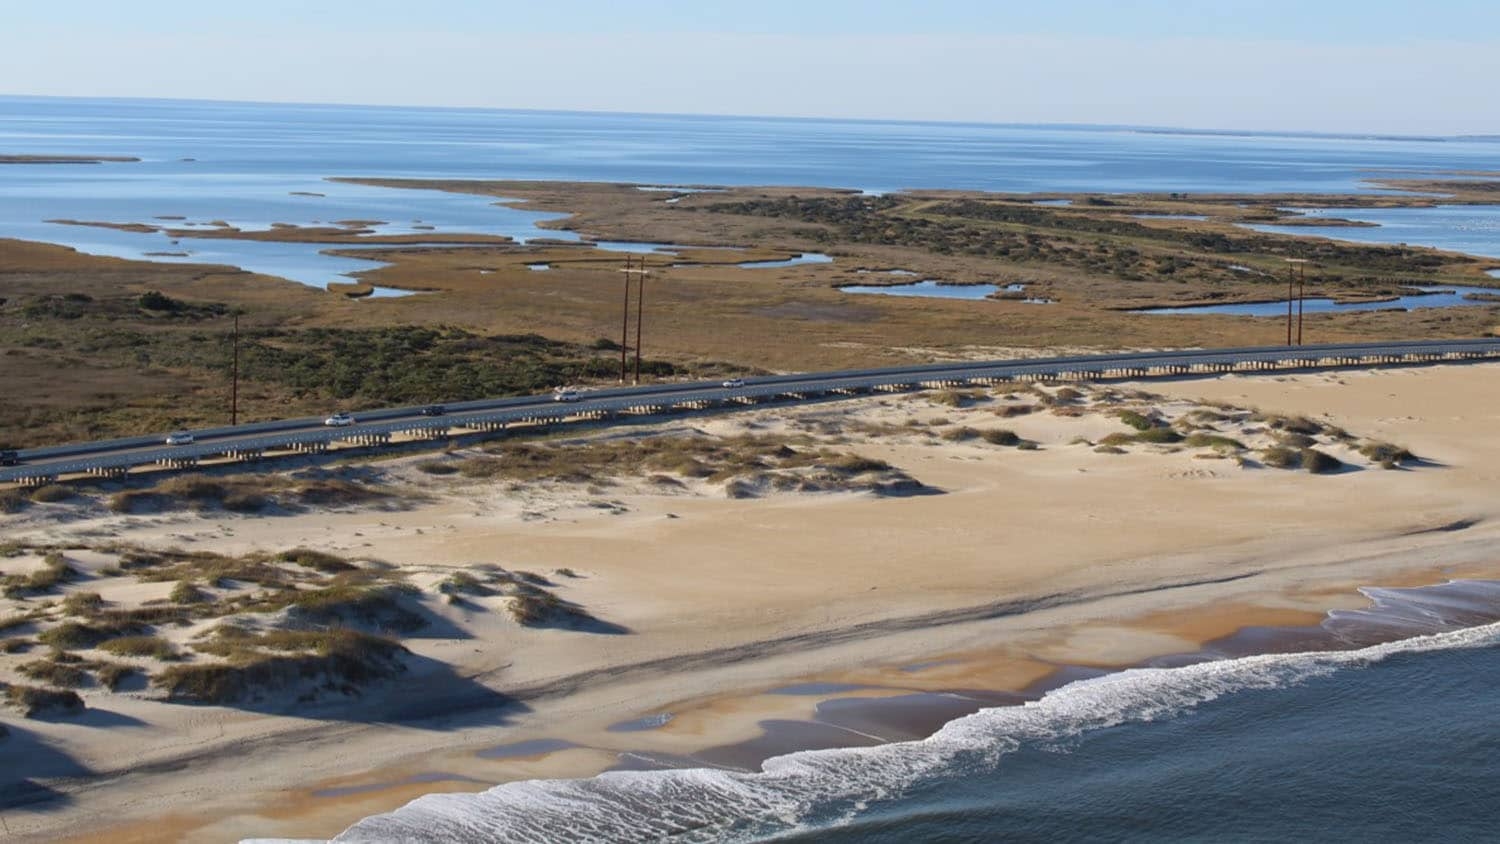 aerial photograph of the ocean, beach, dunes, a highway, and then wetlands